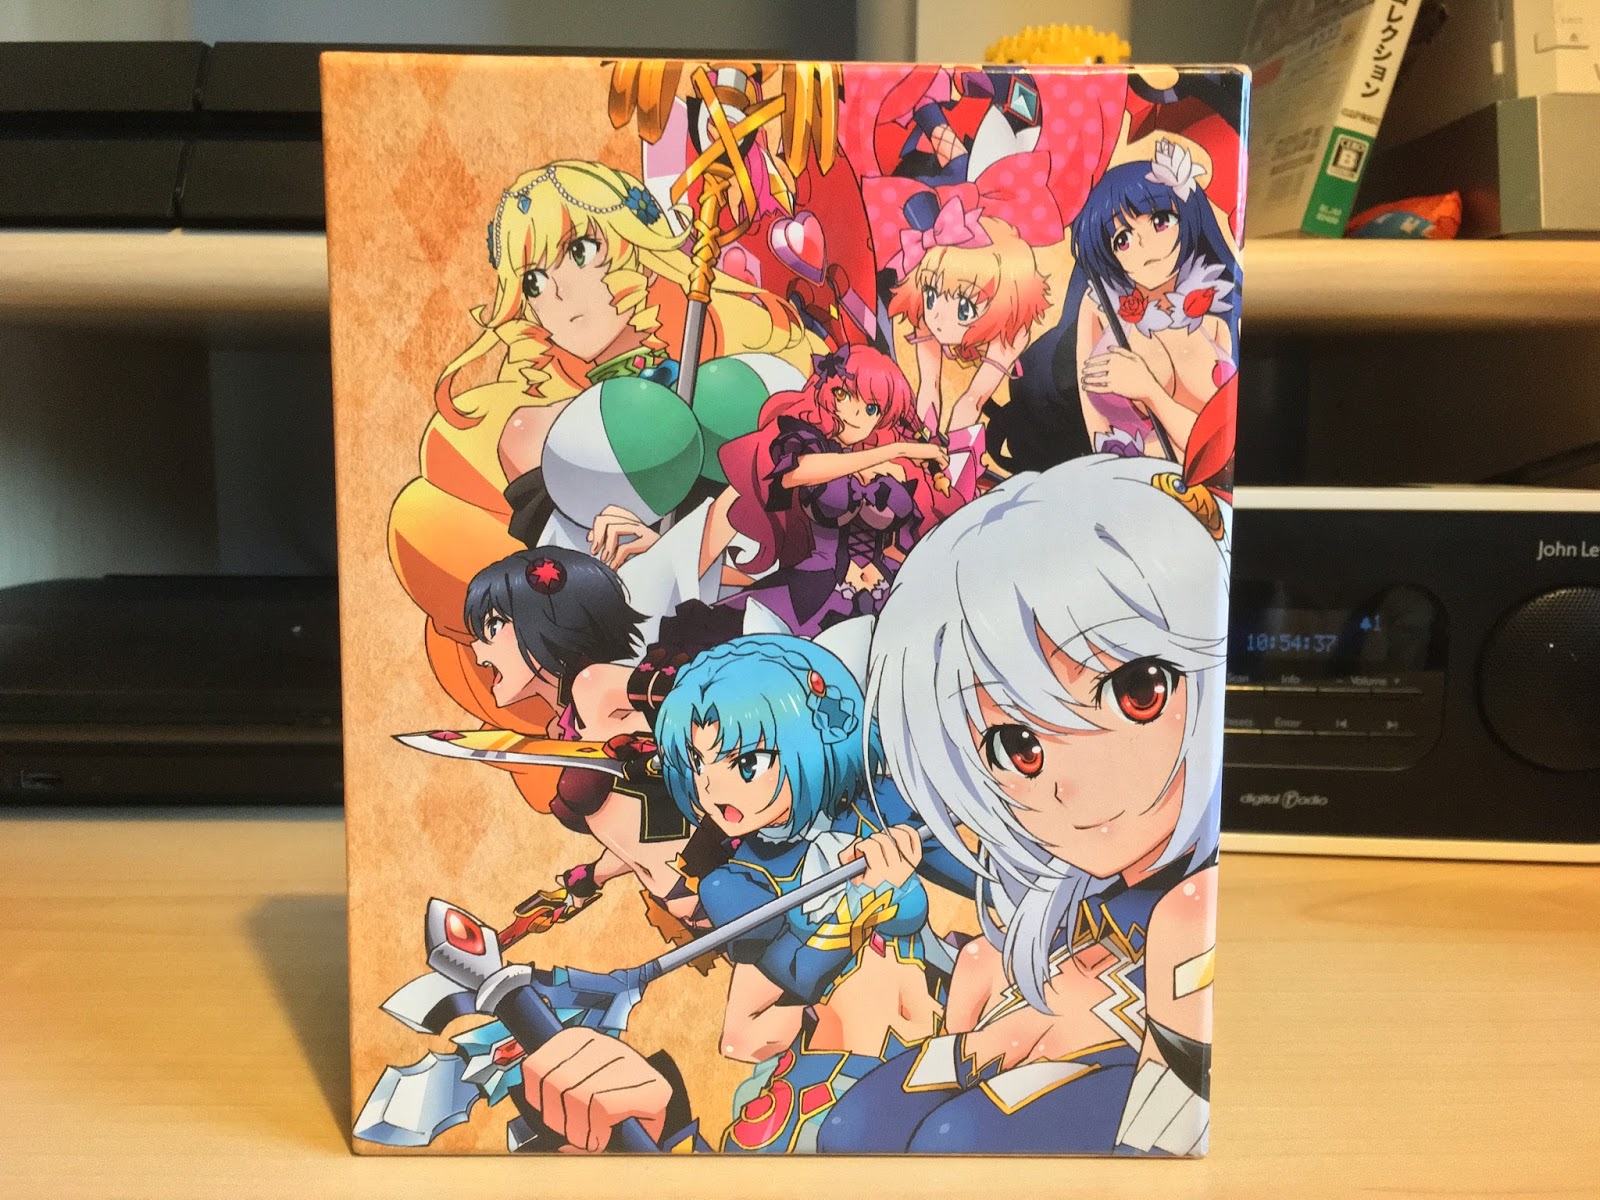 The Normanic Vault: Unboxing [US]: The Devil is a Part-Timer